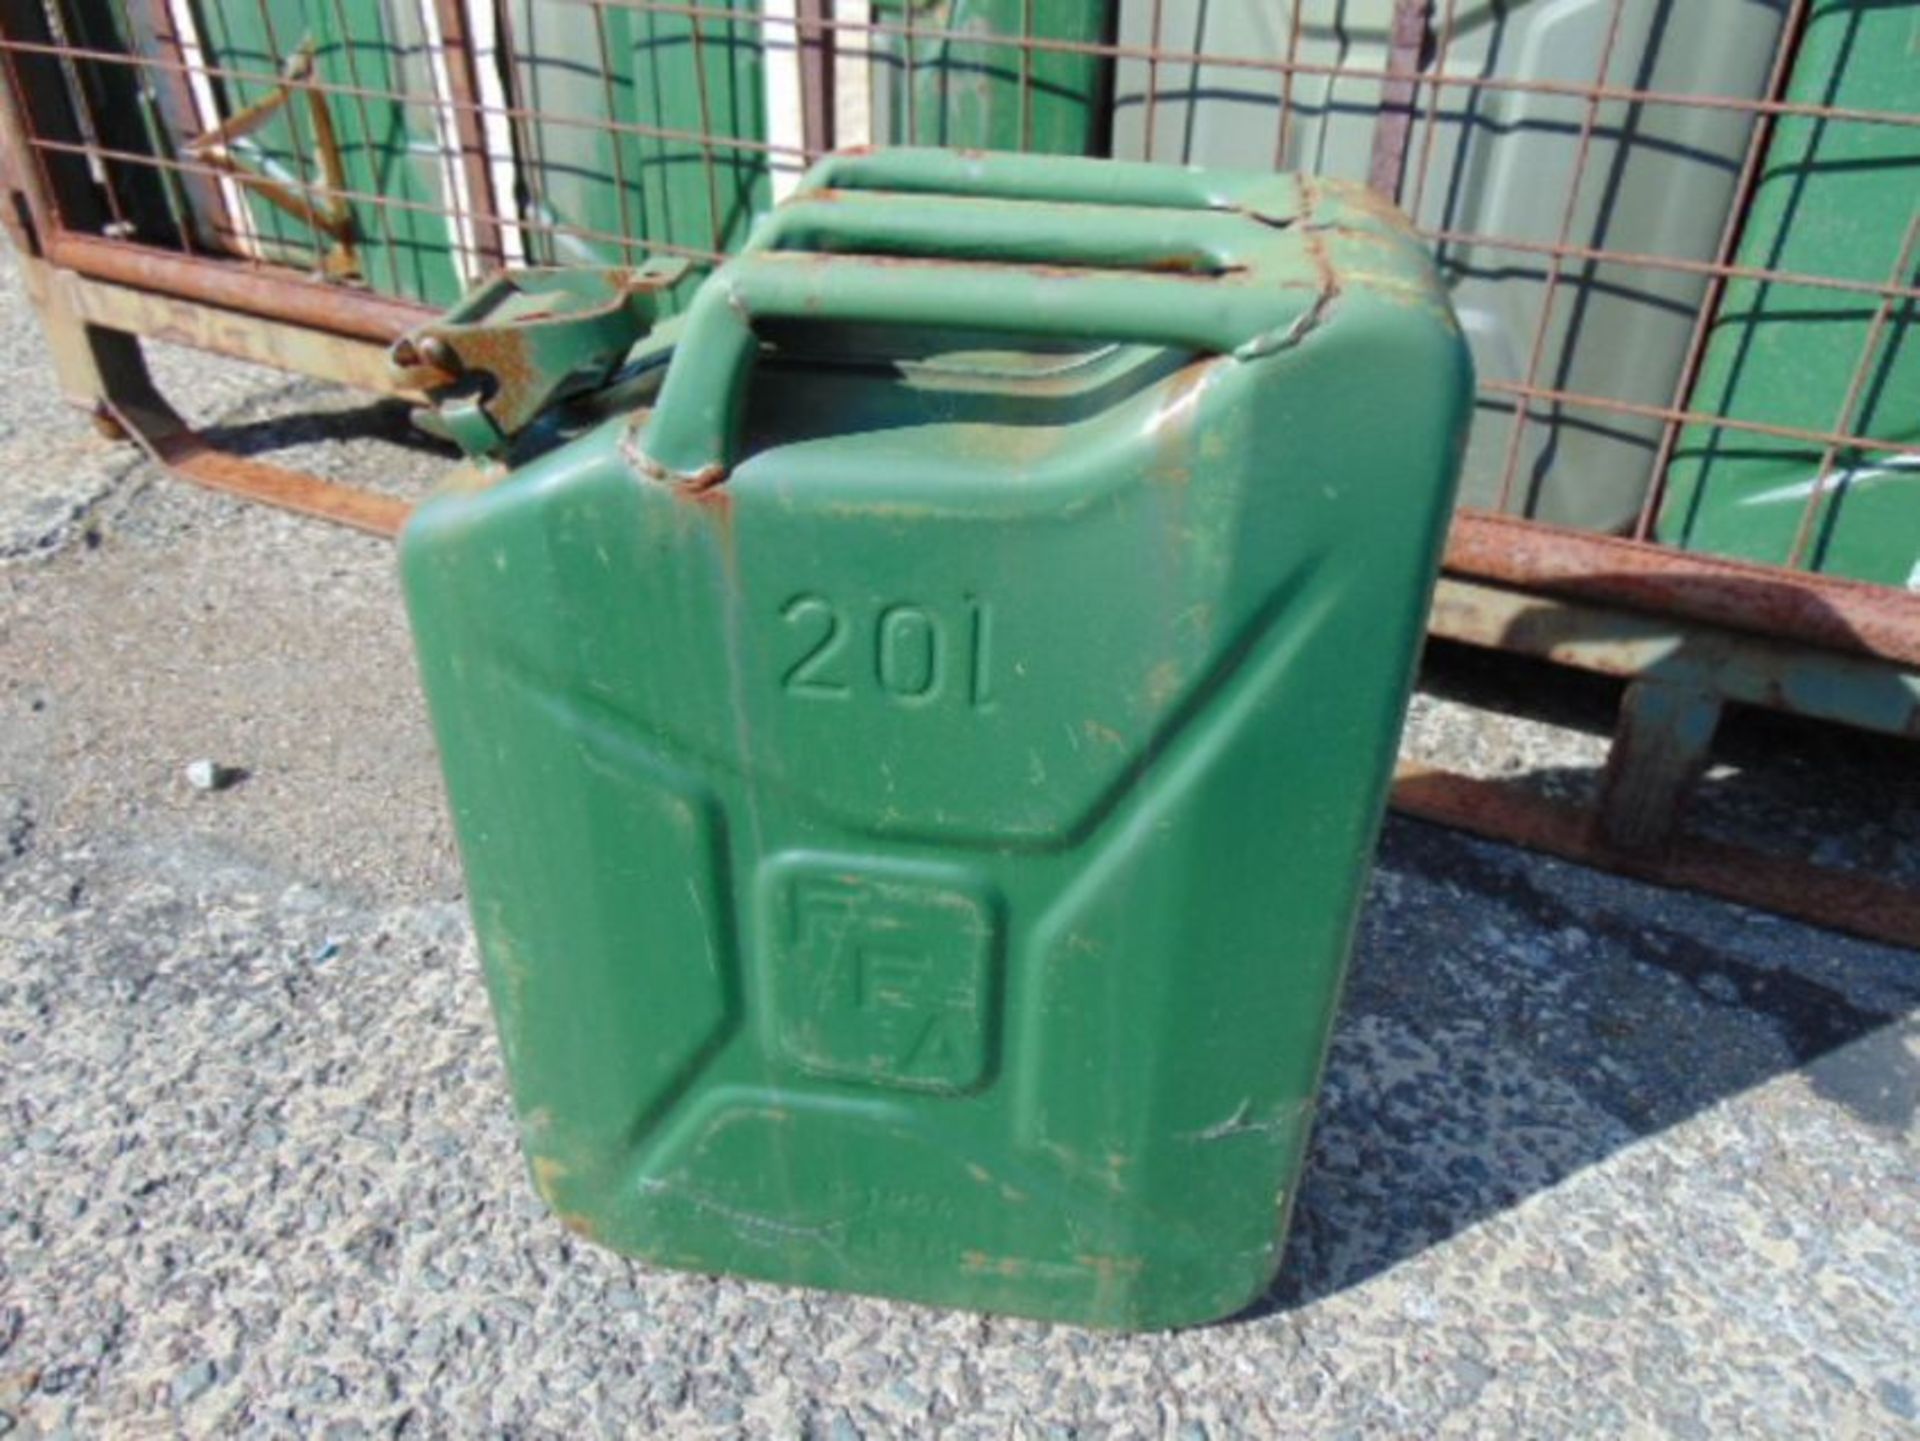 66 x Unused 5 Gal (20 litre) Jerry Cans direct from storage - Image 3 of 5